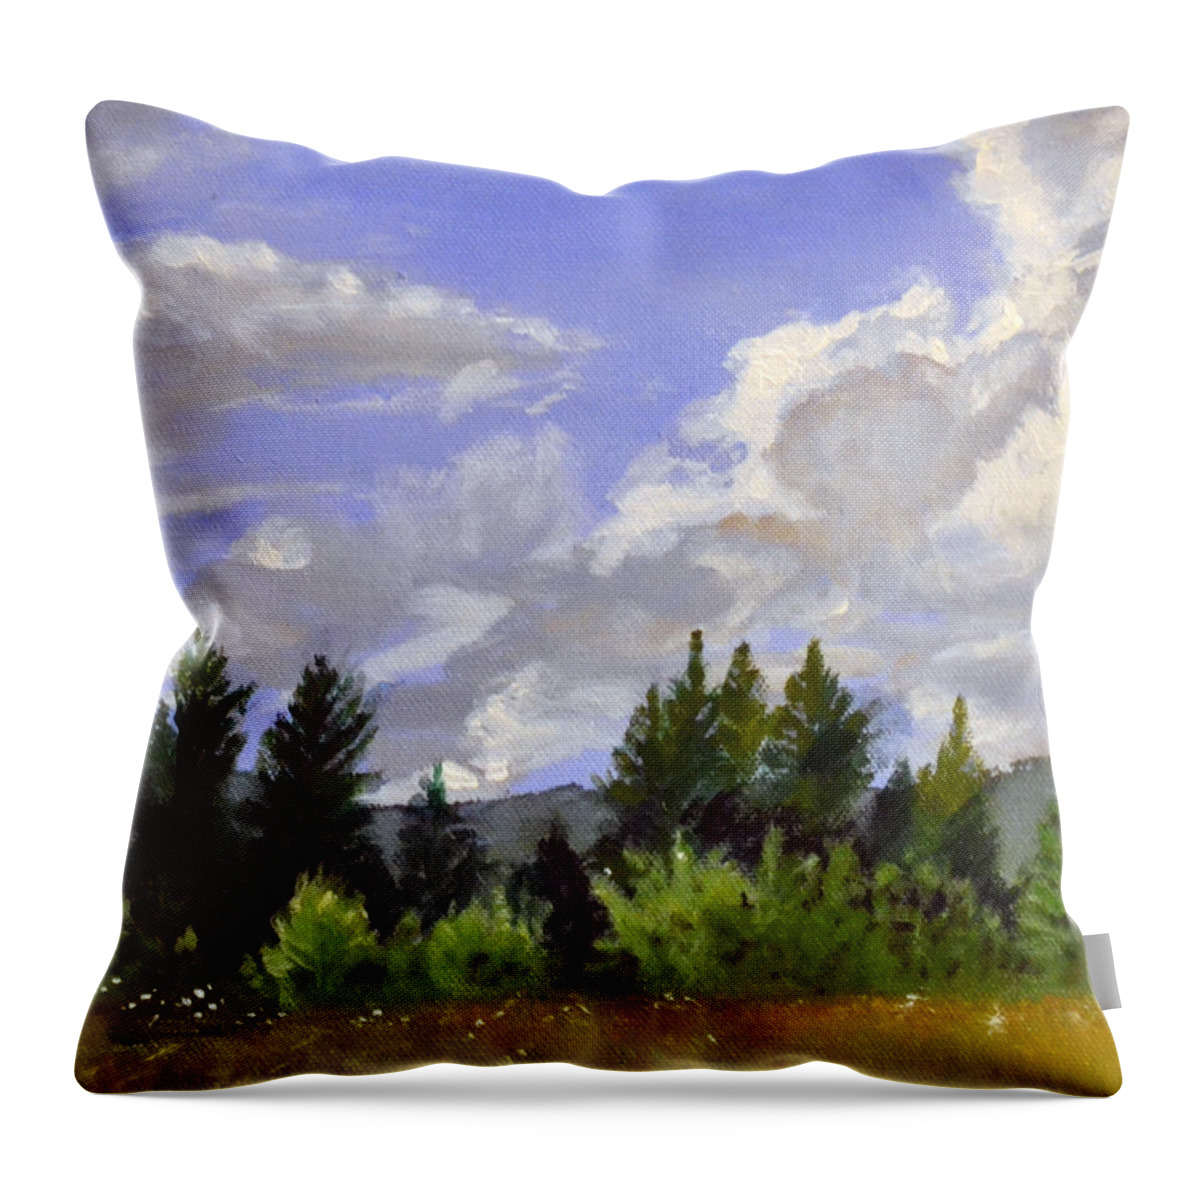 Clouds Throw Pillow featuring the painting Clouds Over Lace by Mary Chant